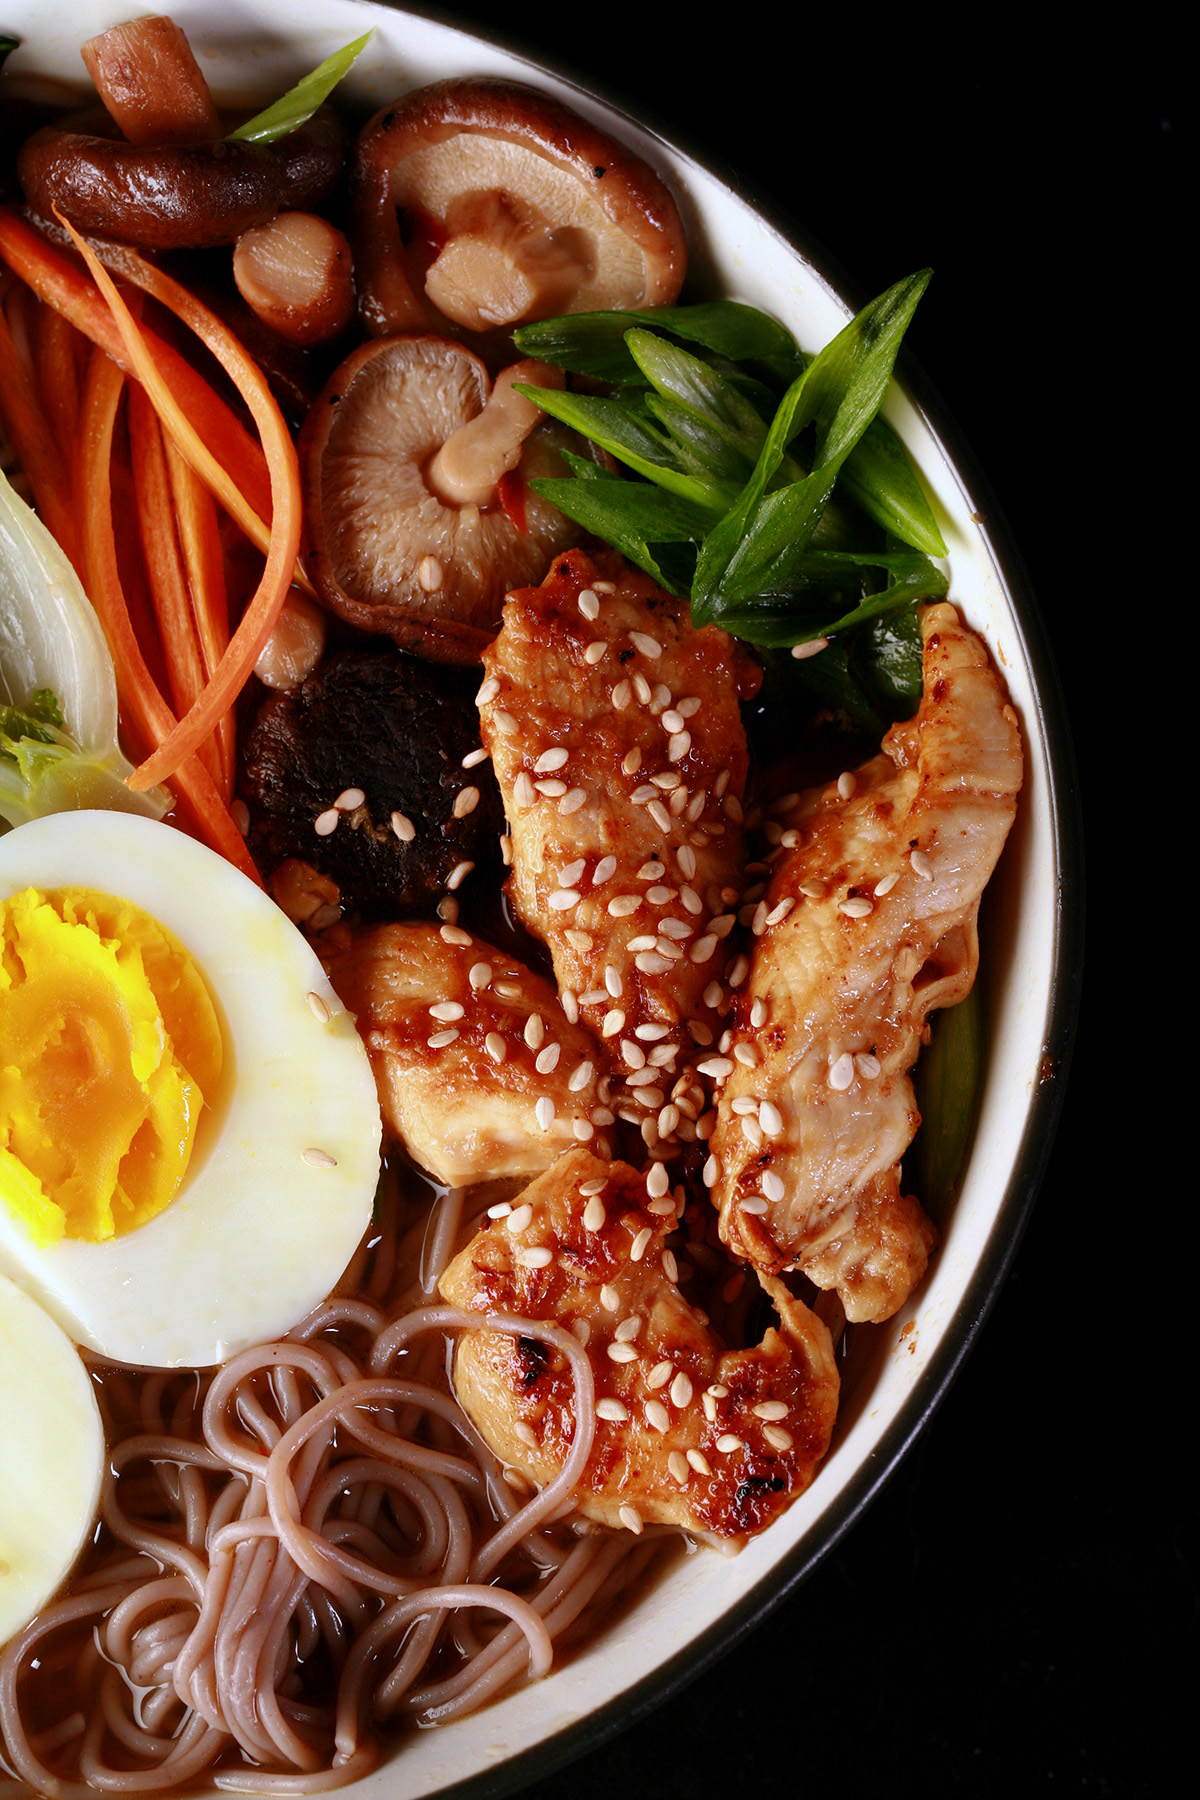 A bowl of gluten free ramen, with chicken and vegetables.